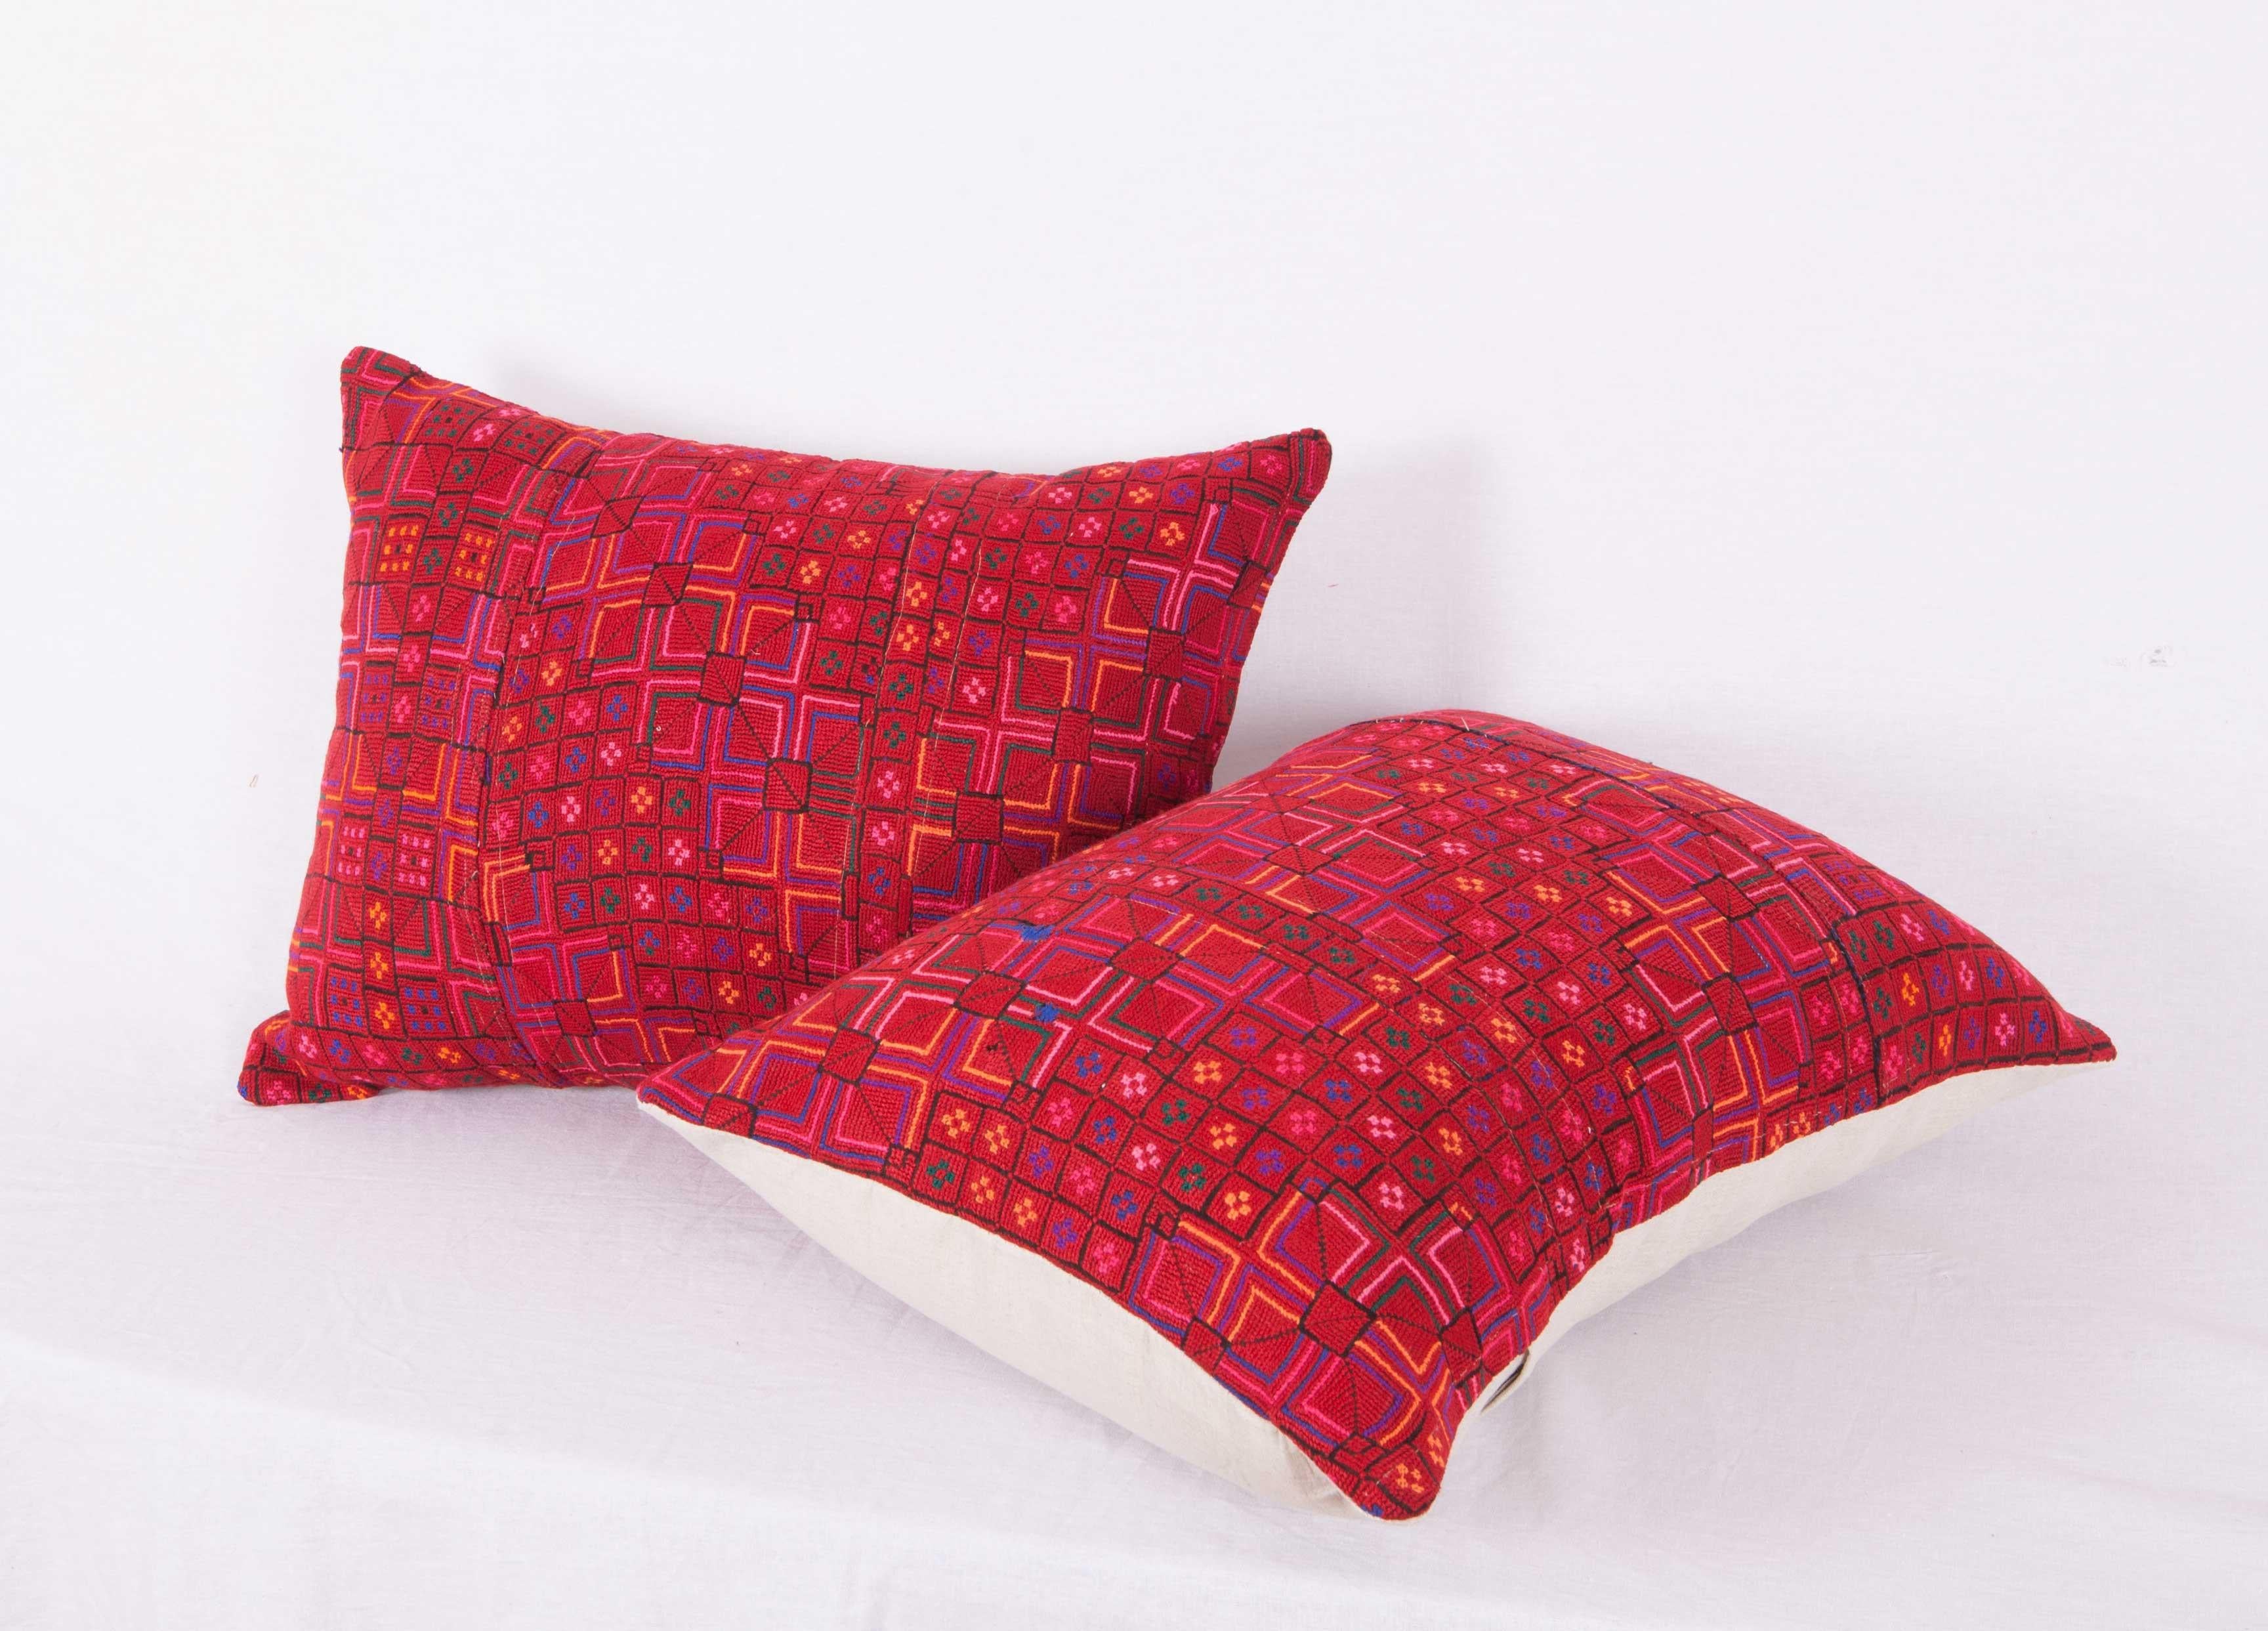 Tribal Pillow Cases or Cushions Made from a Middle Eastern Syrian Bedouin Embroidery